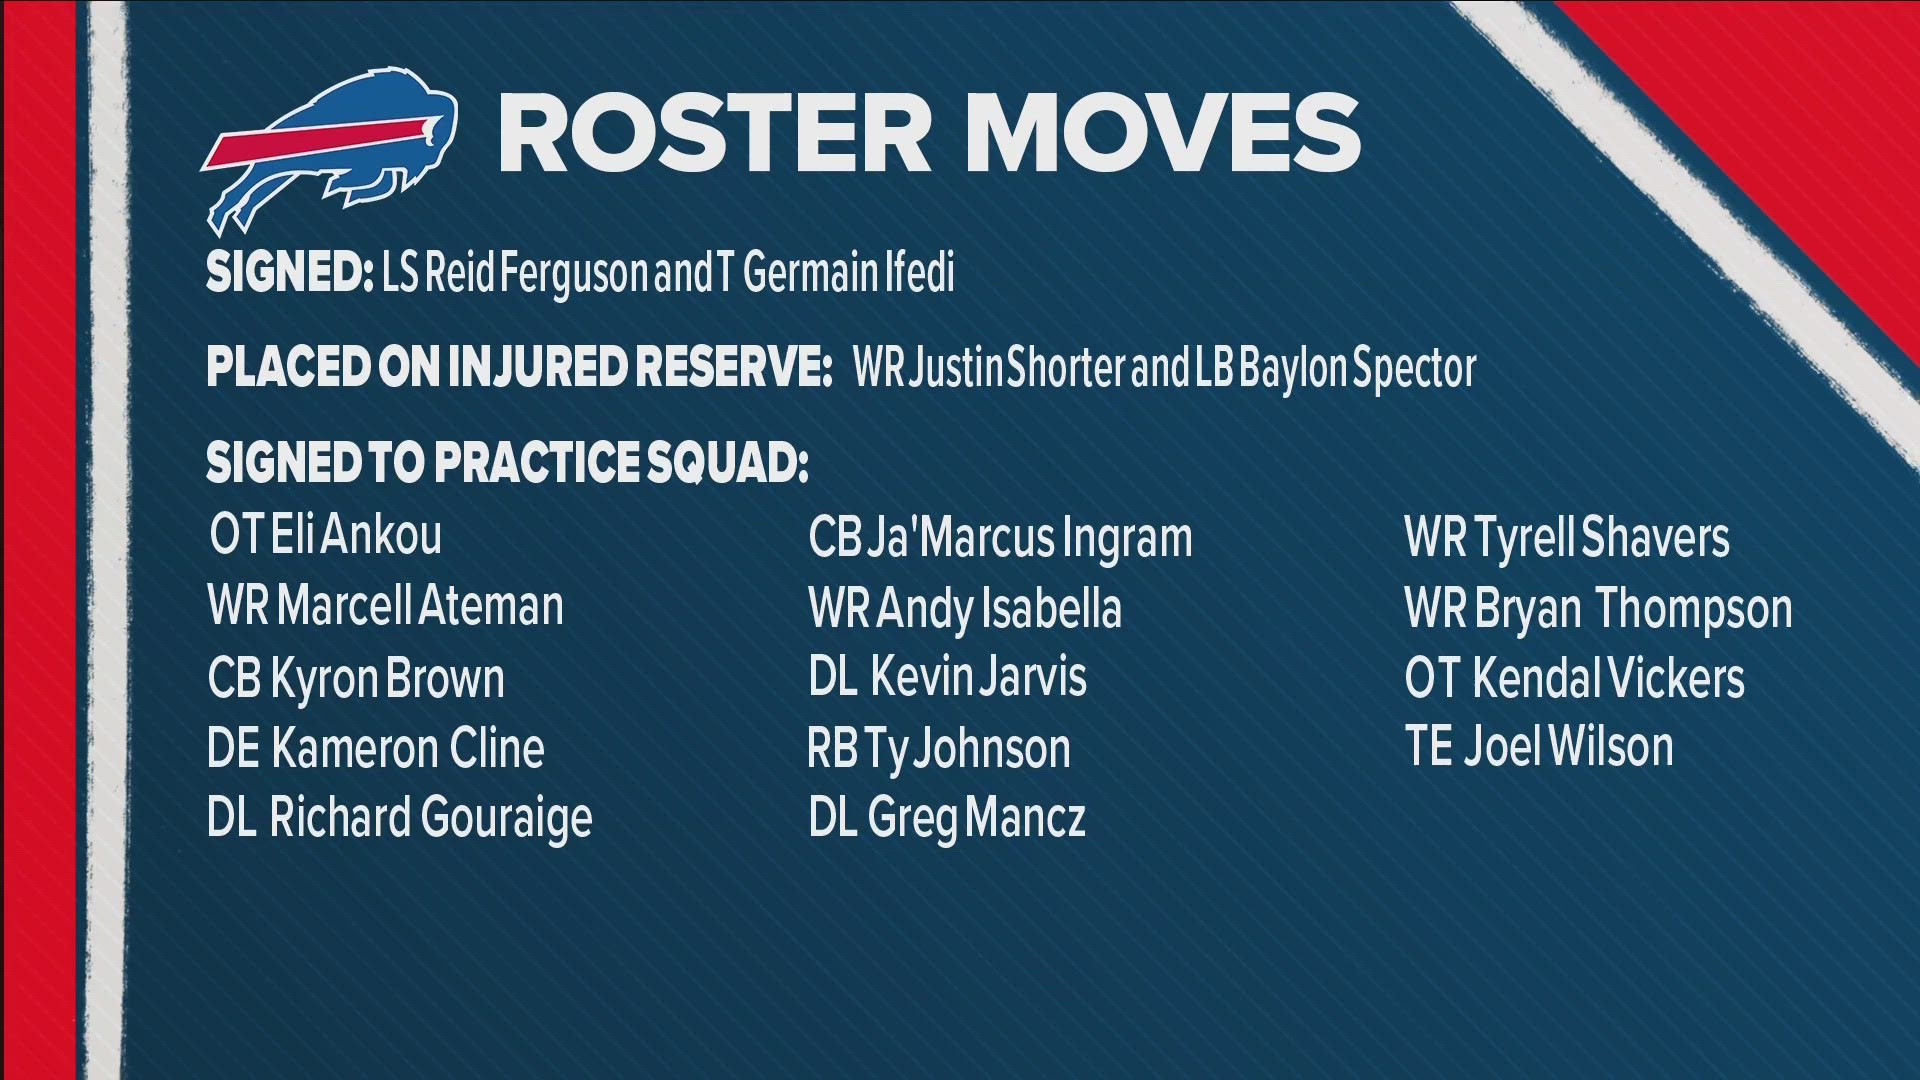 SIGNING *2 PLAYERS TO THE ROSTER... AND *14 GUYS TO THE PRACTICE SQUAD